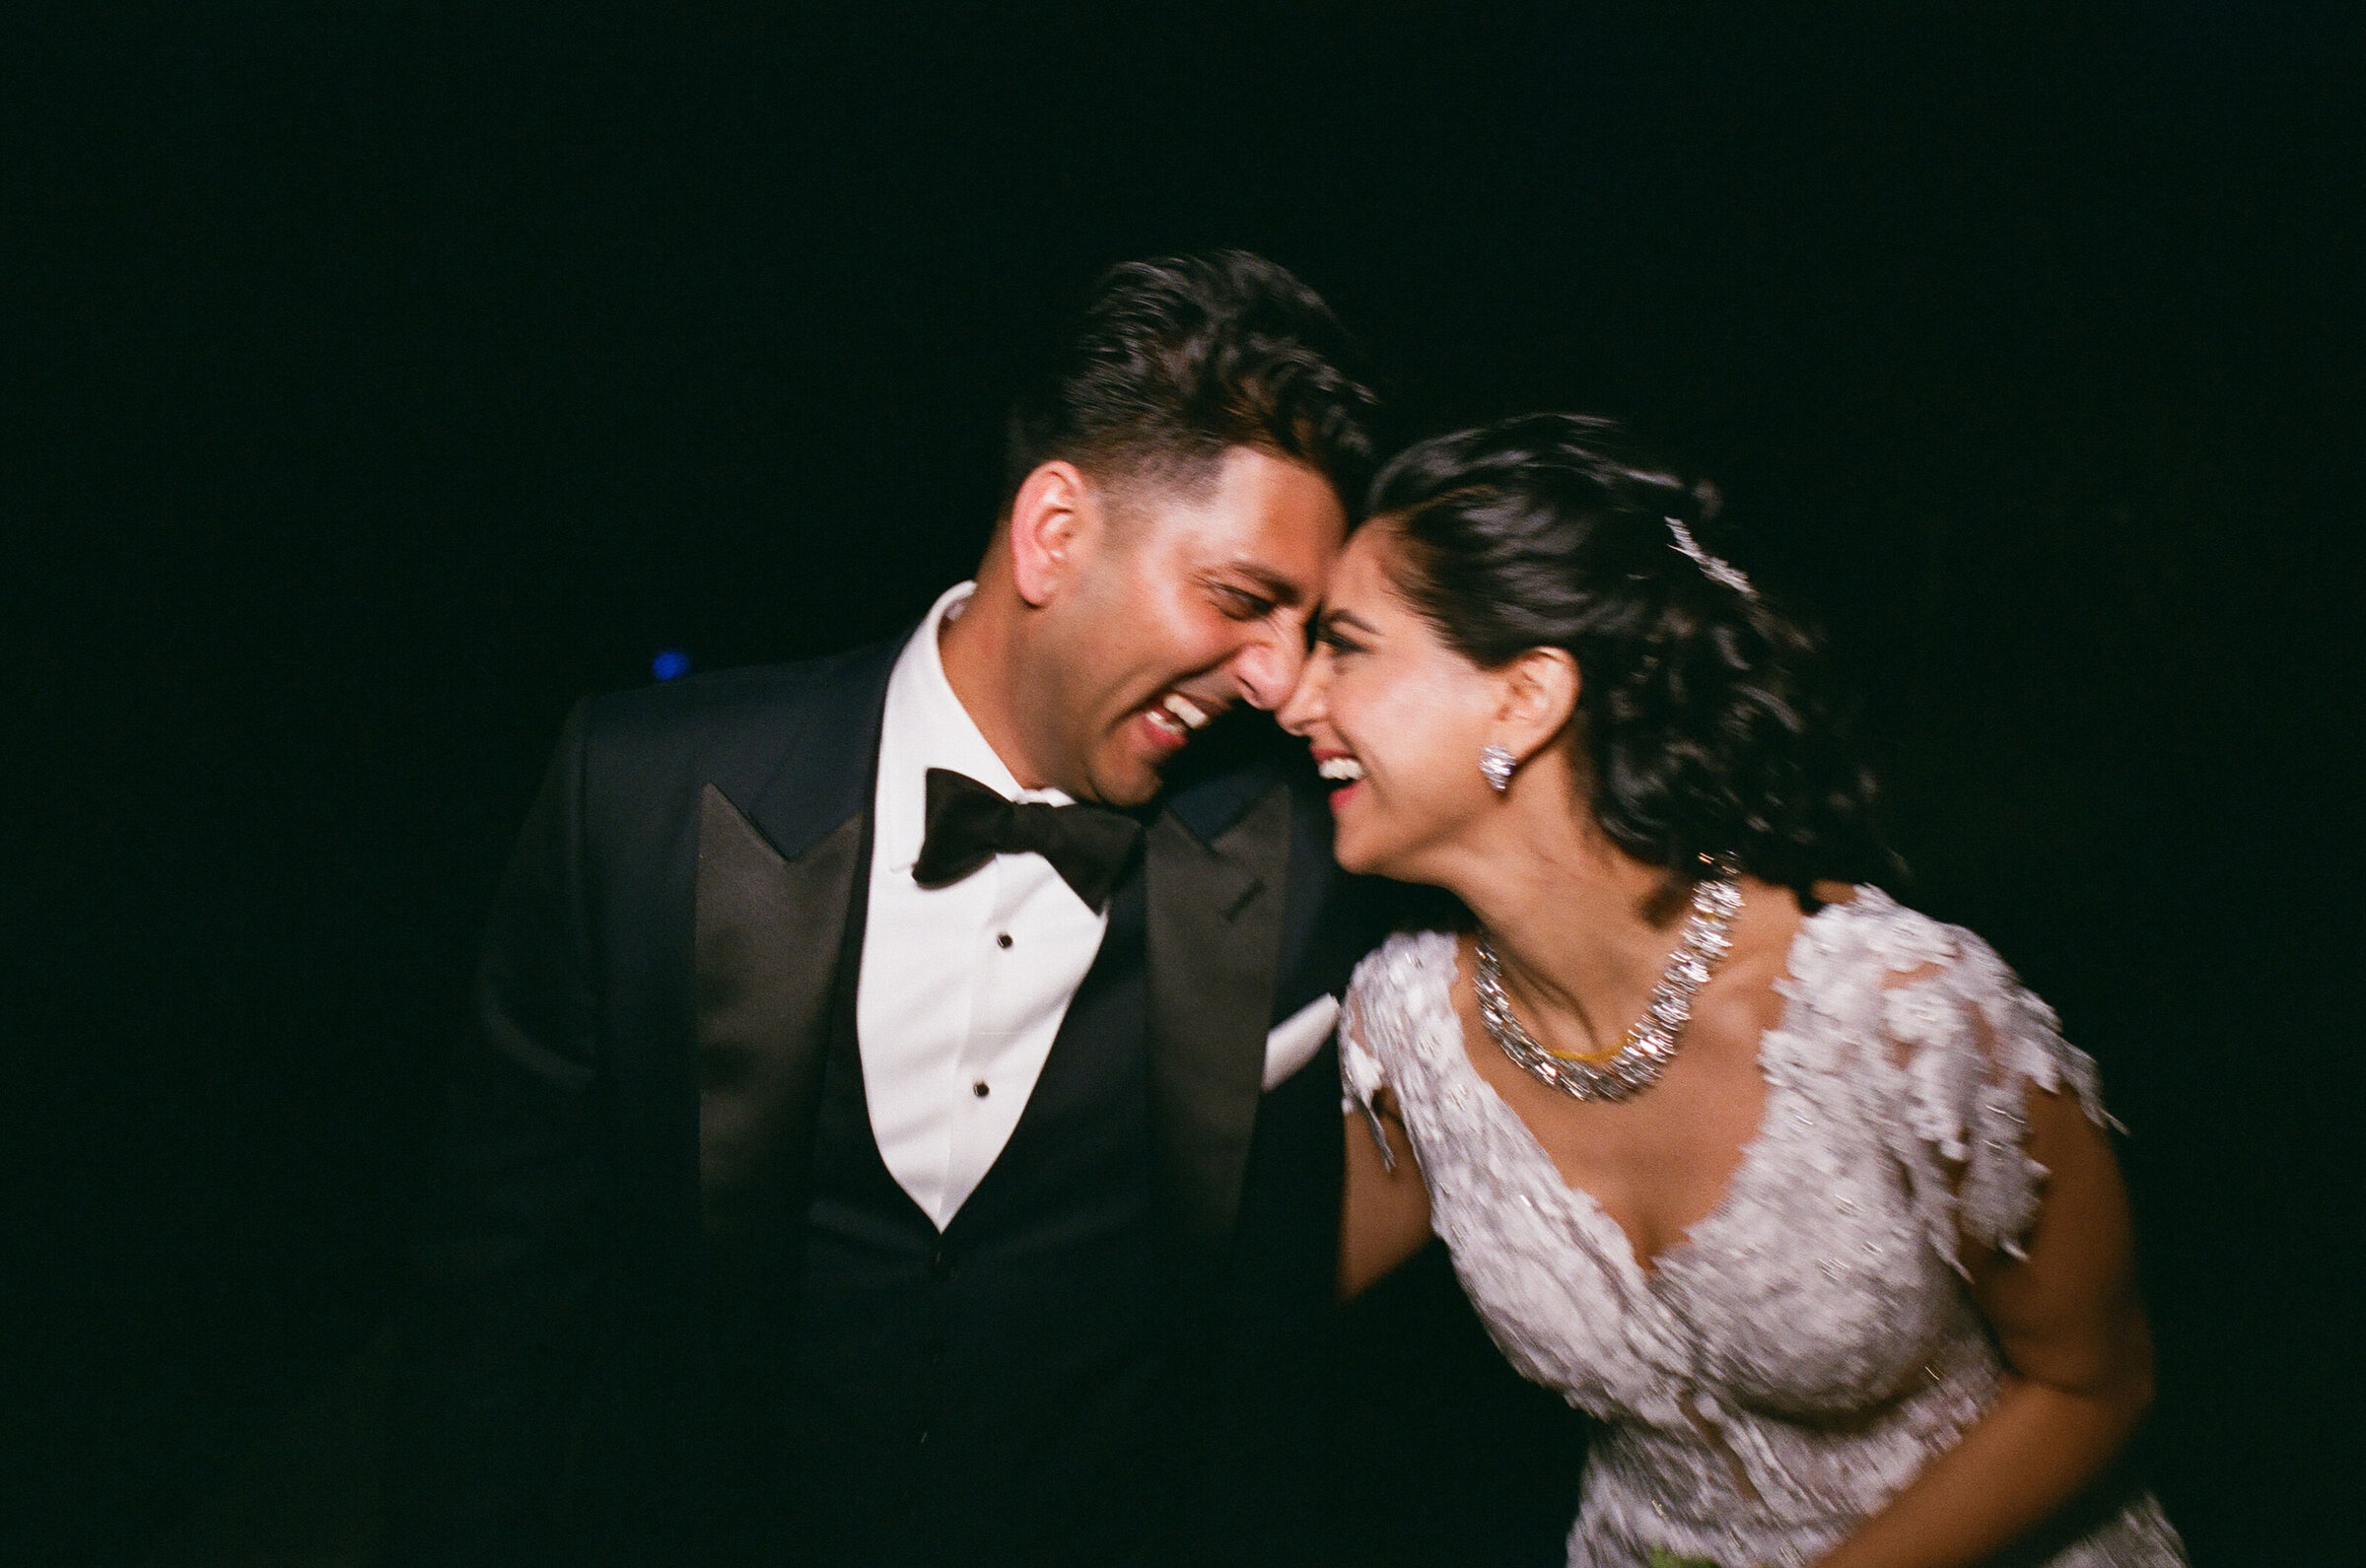 A wedding couple leaning in and touching foreheads as they laugh.